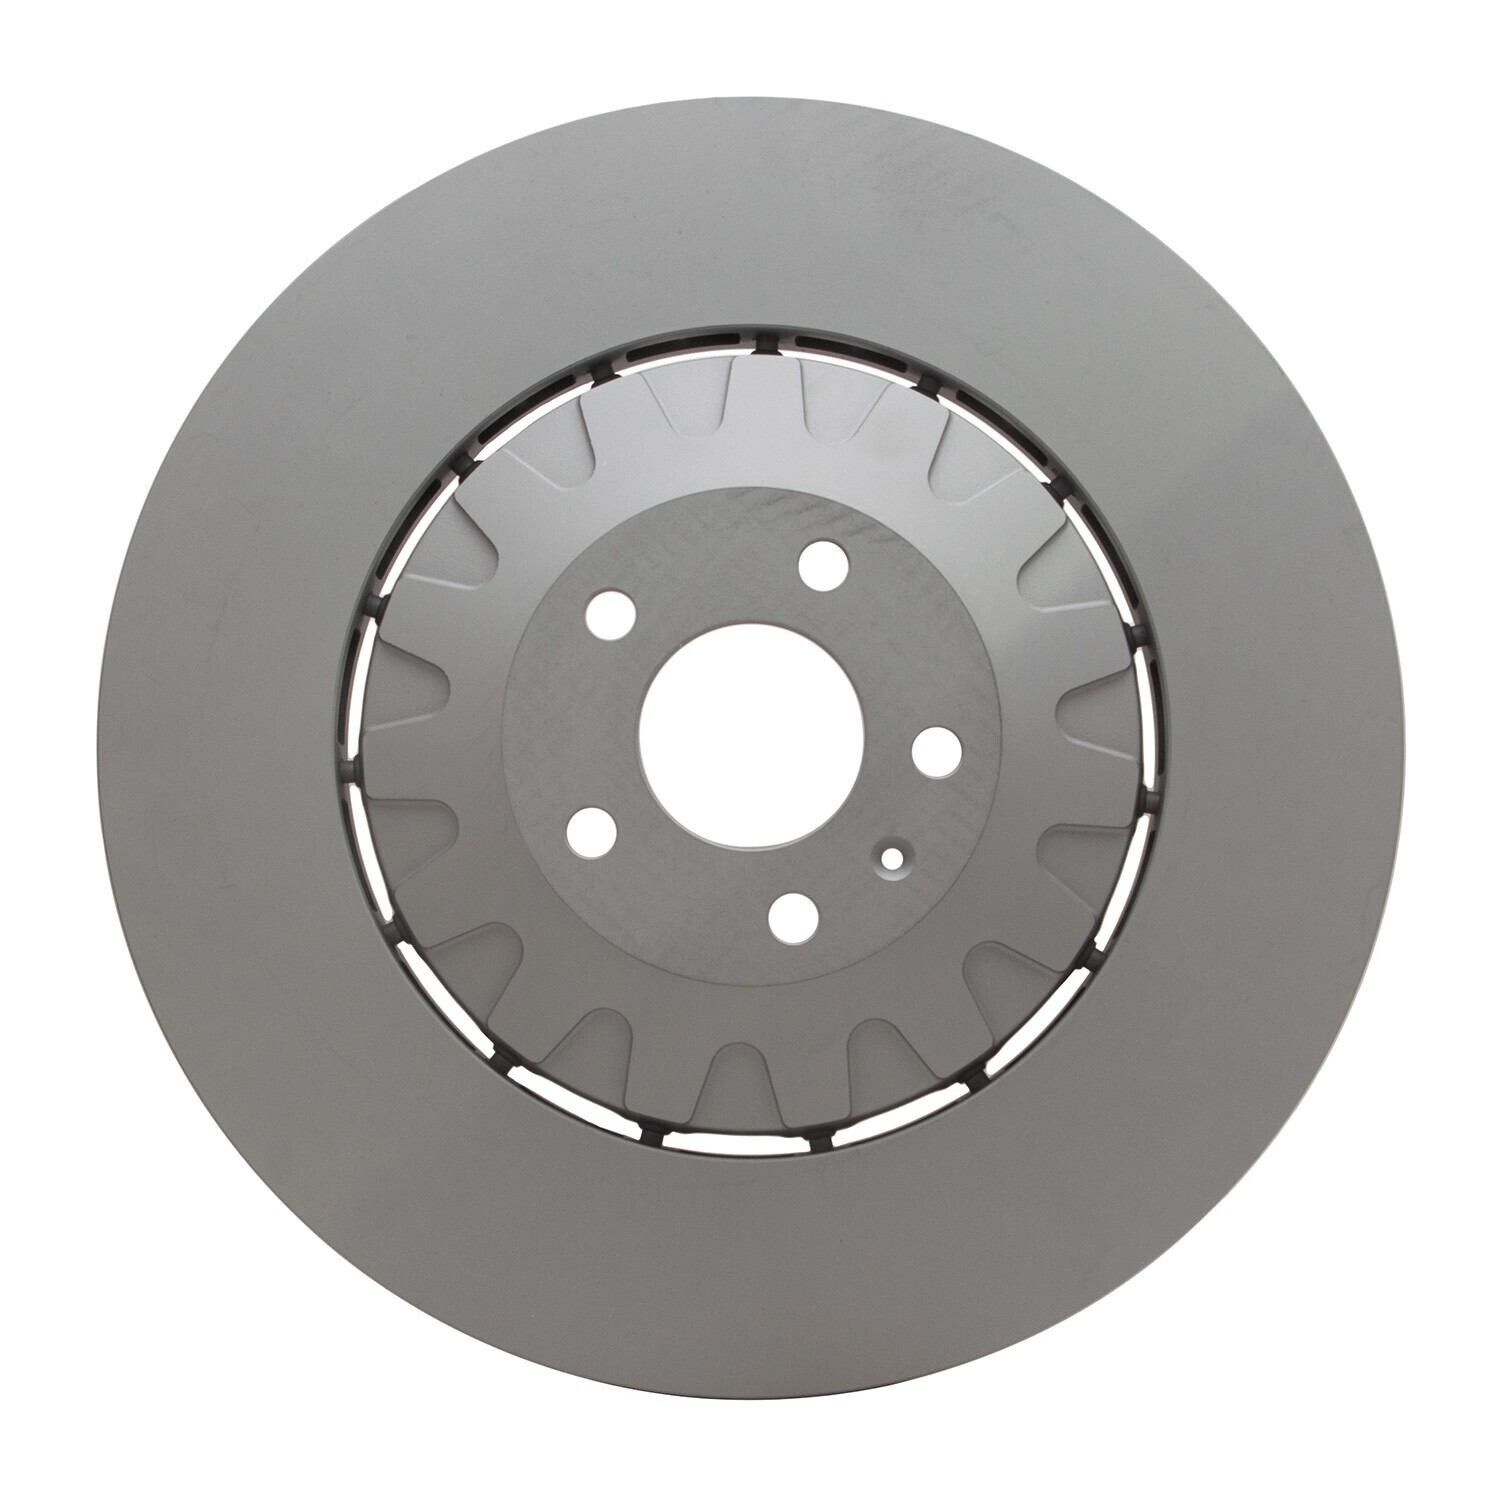 SHW Performance Front 400mm Composite Vented Brake Disc Rotor for Audi S6 S7 S8